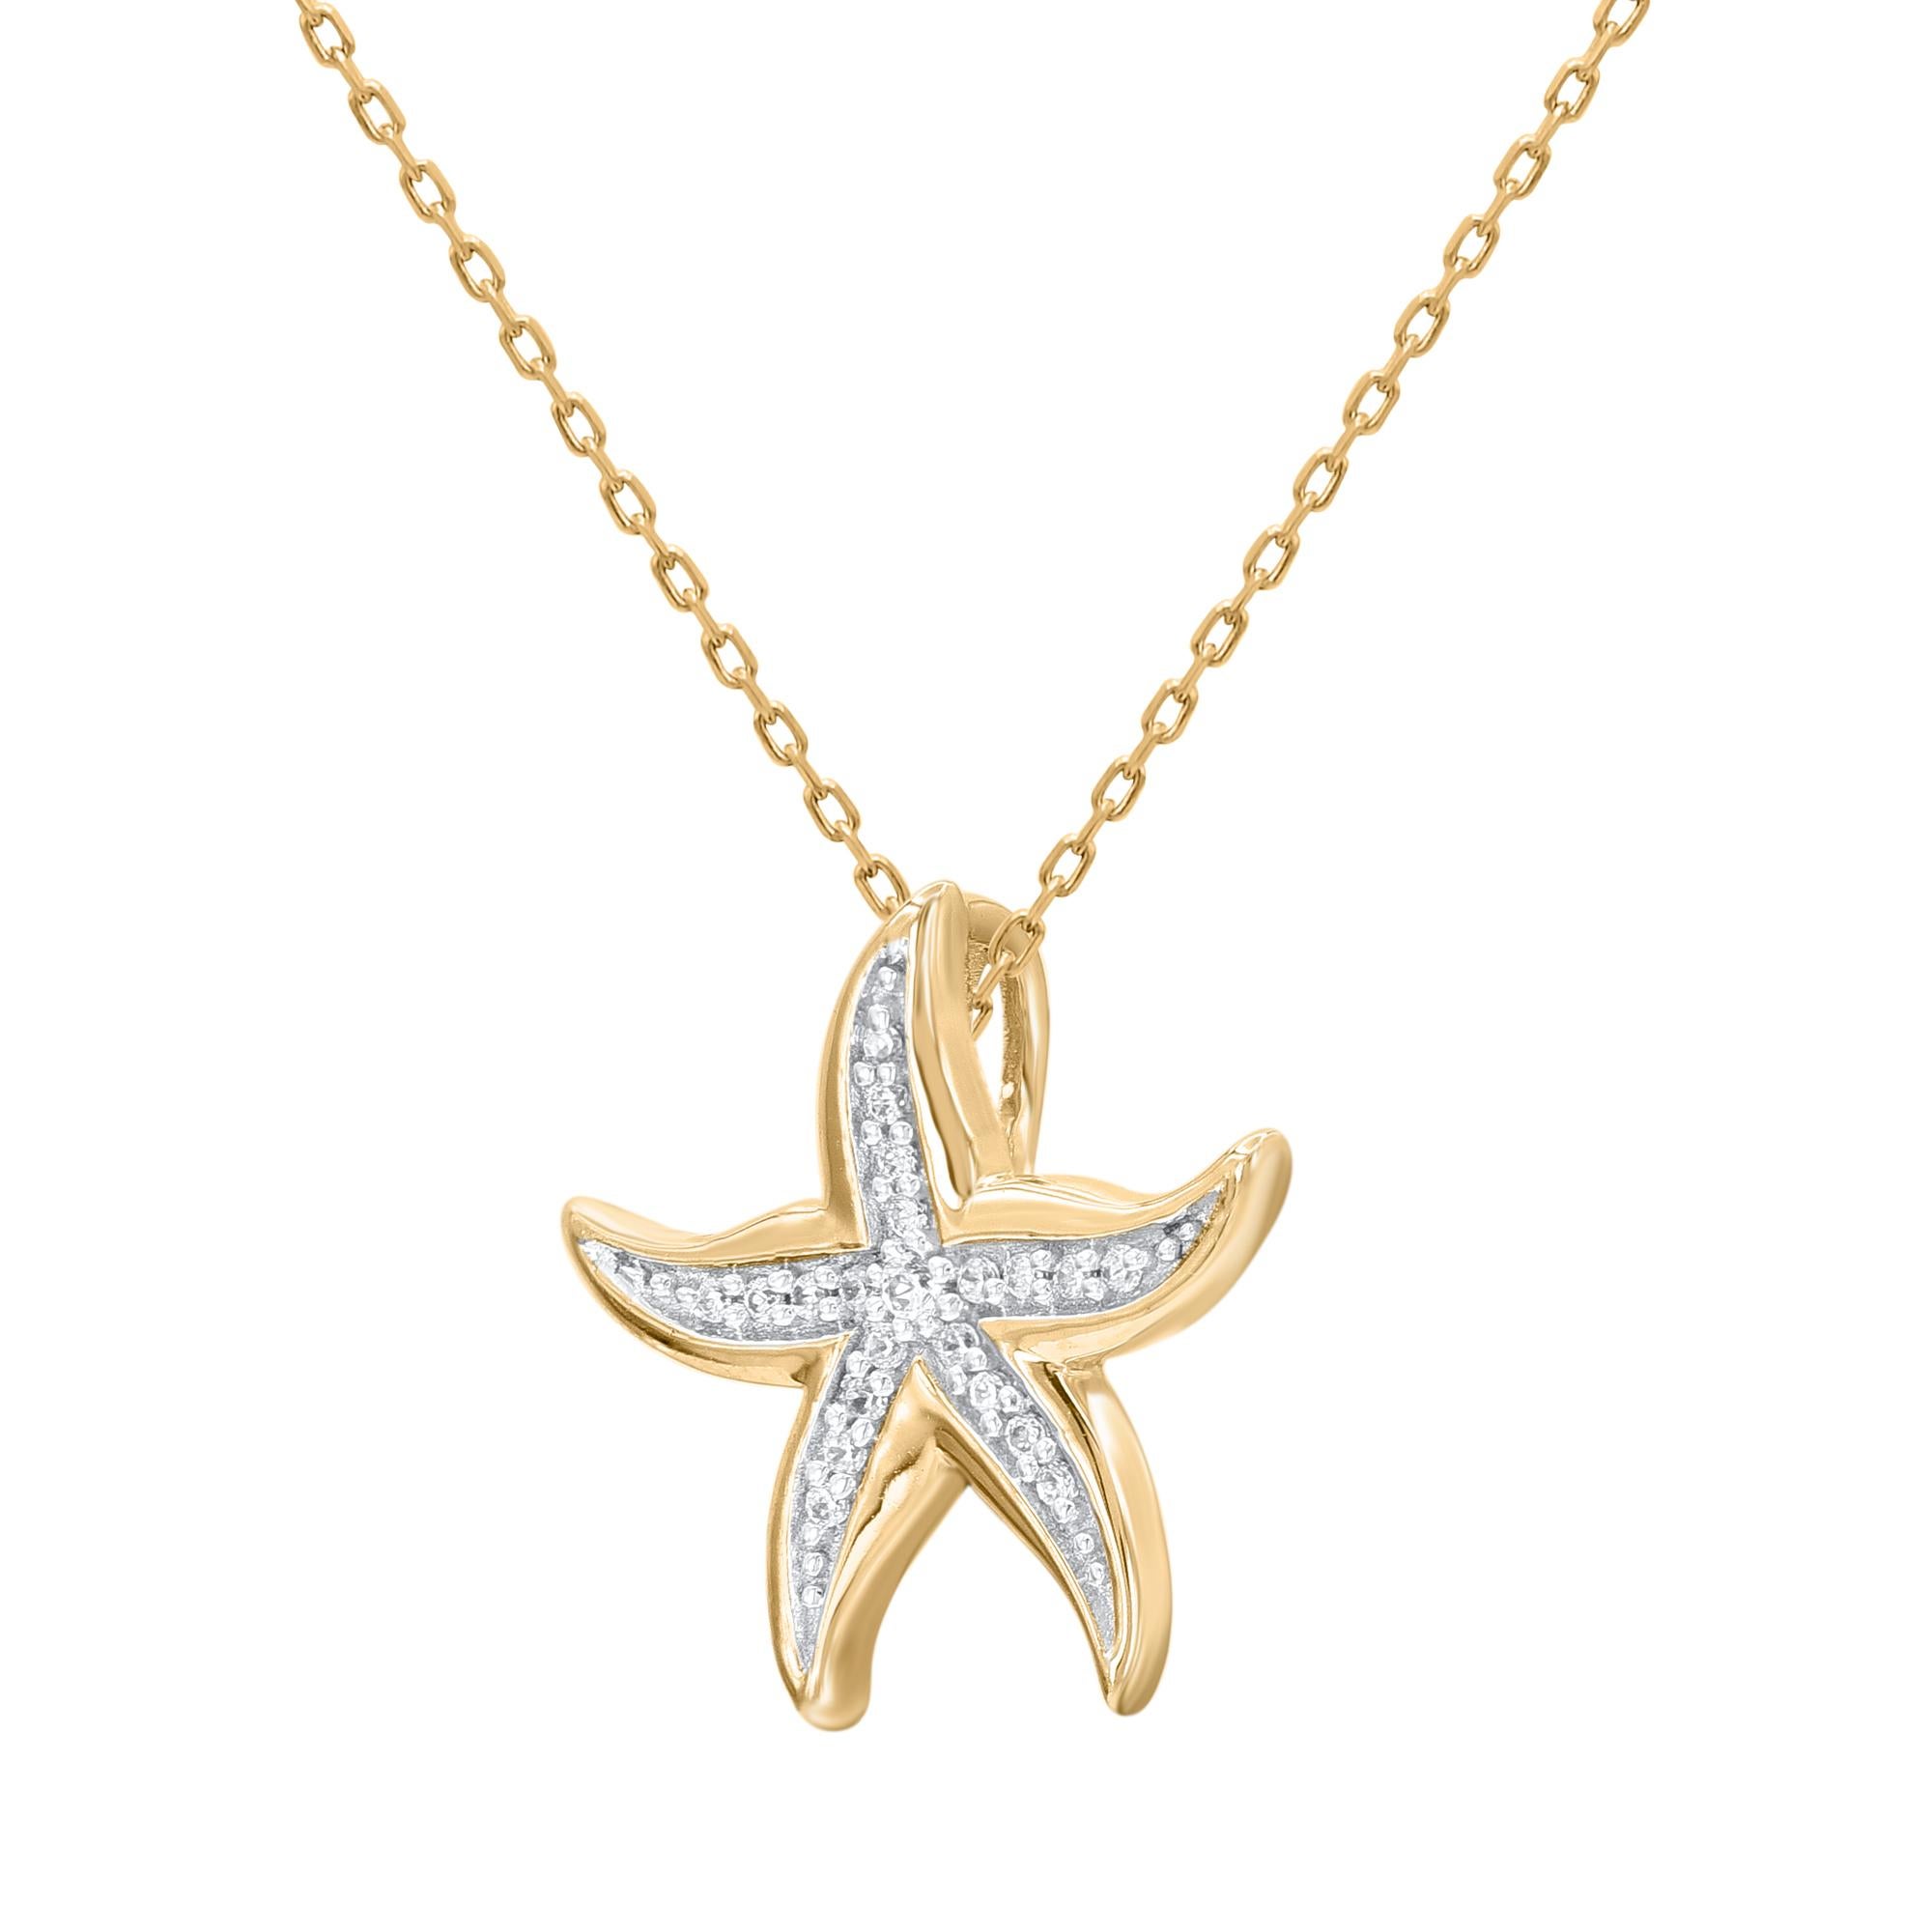 Give your casual look a fun beachy vibe with this starfish pendant necklace. These pendants are studded with 21 single cut and brilliant cut natural diamonds in pave setting and pendant crafted in 14 karat yellow gold. Total diamond weight is 0.05